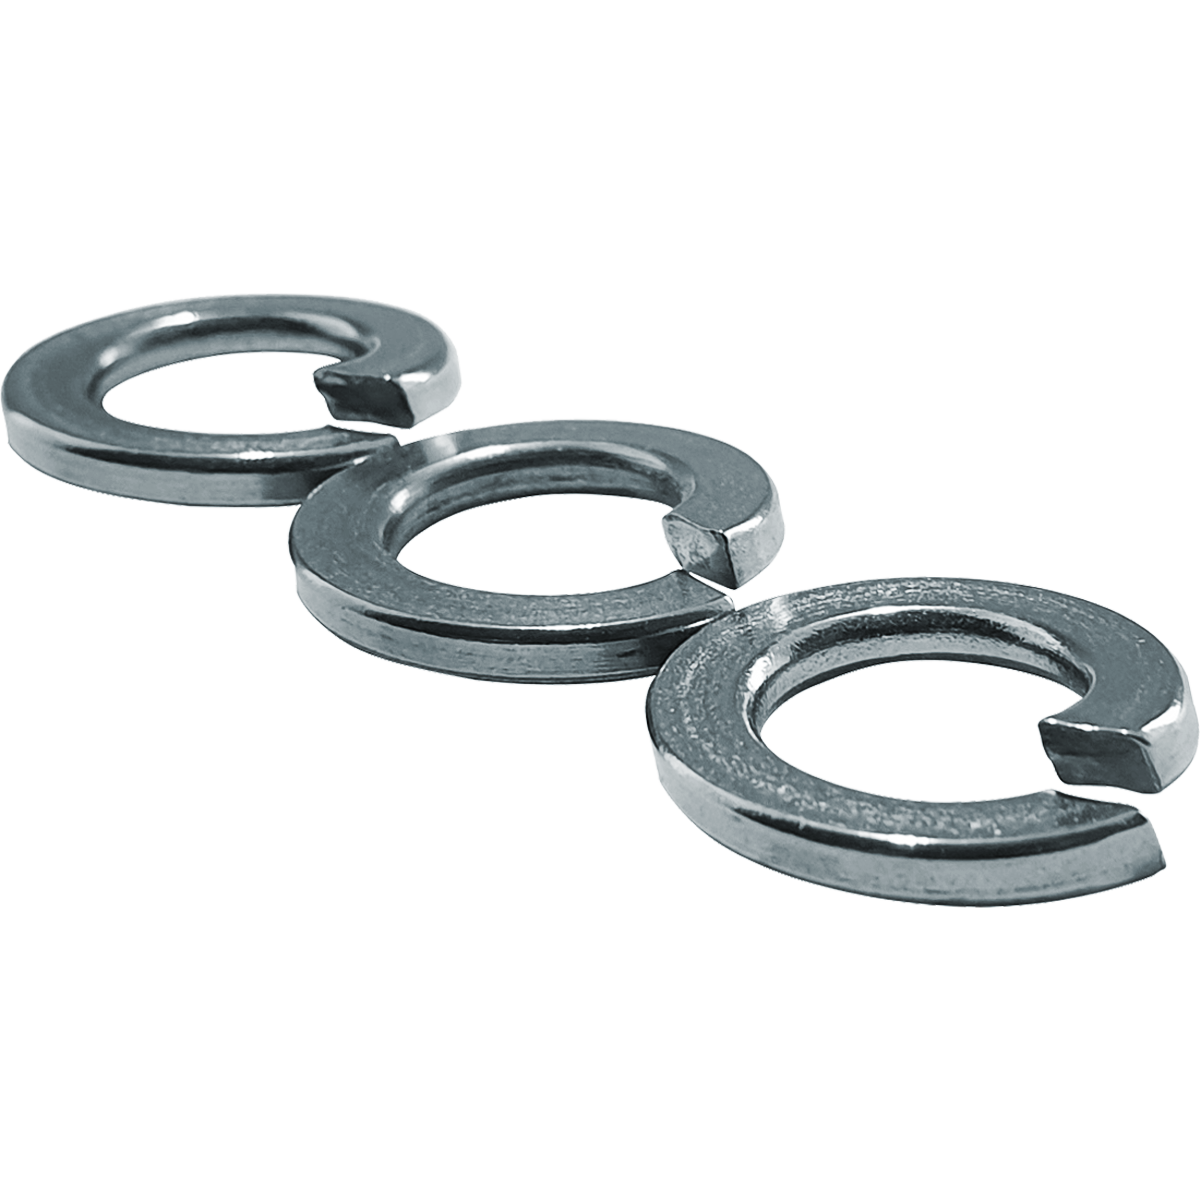 Imperial, rectangular Spring Washers, manufactured from grade 4.6 steel with a bright zinc plating